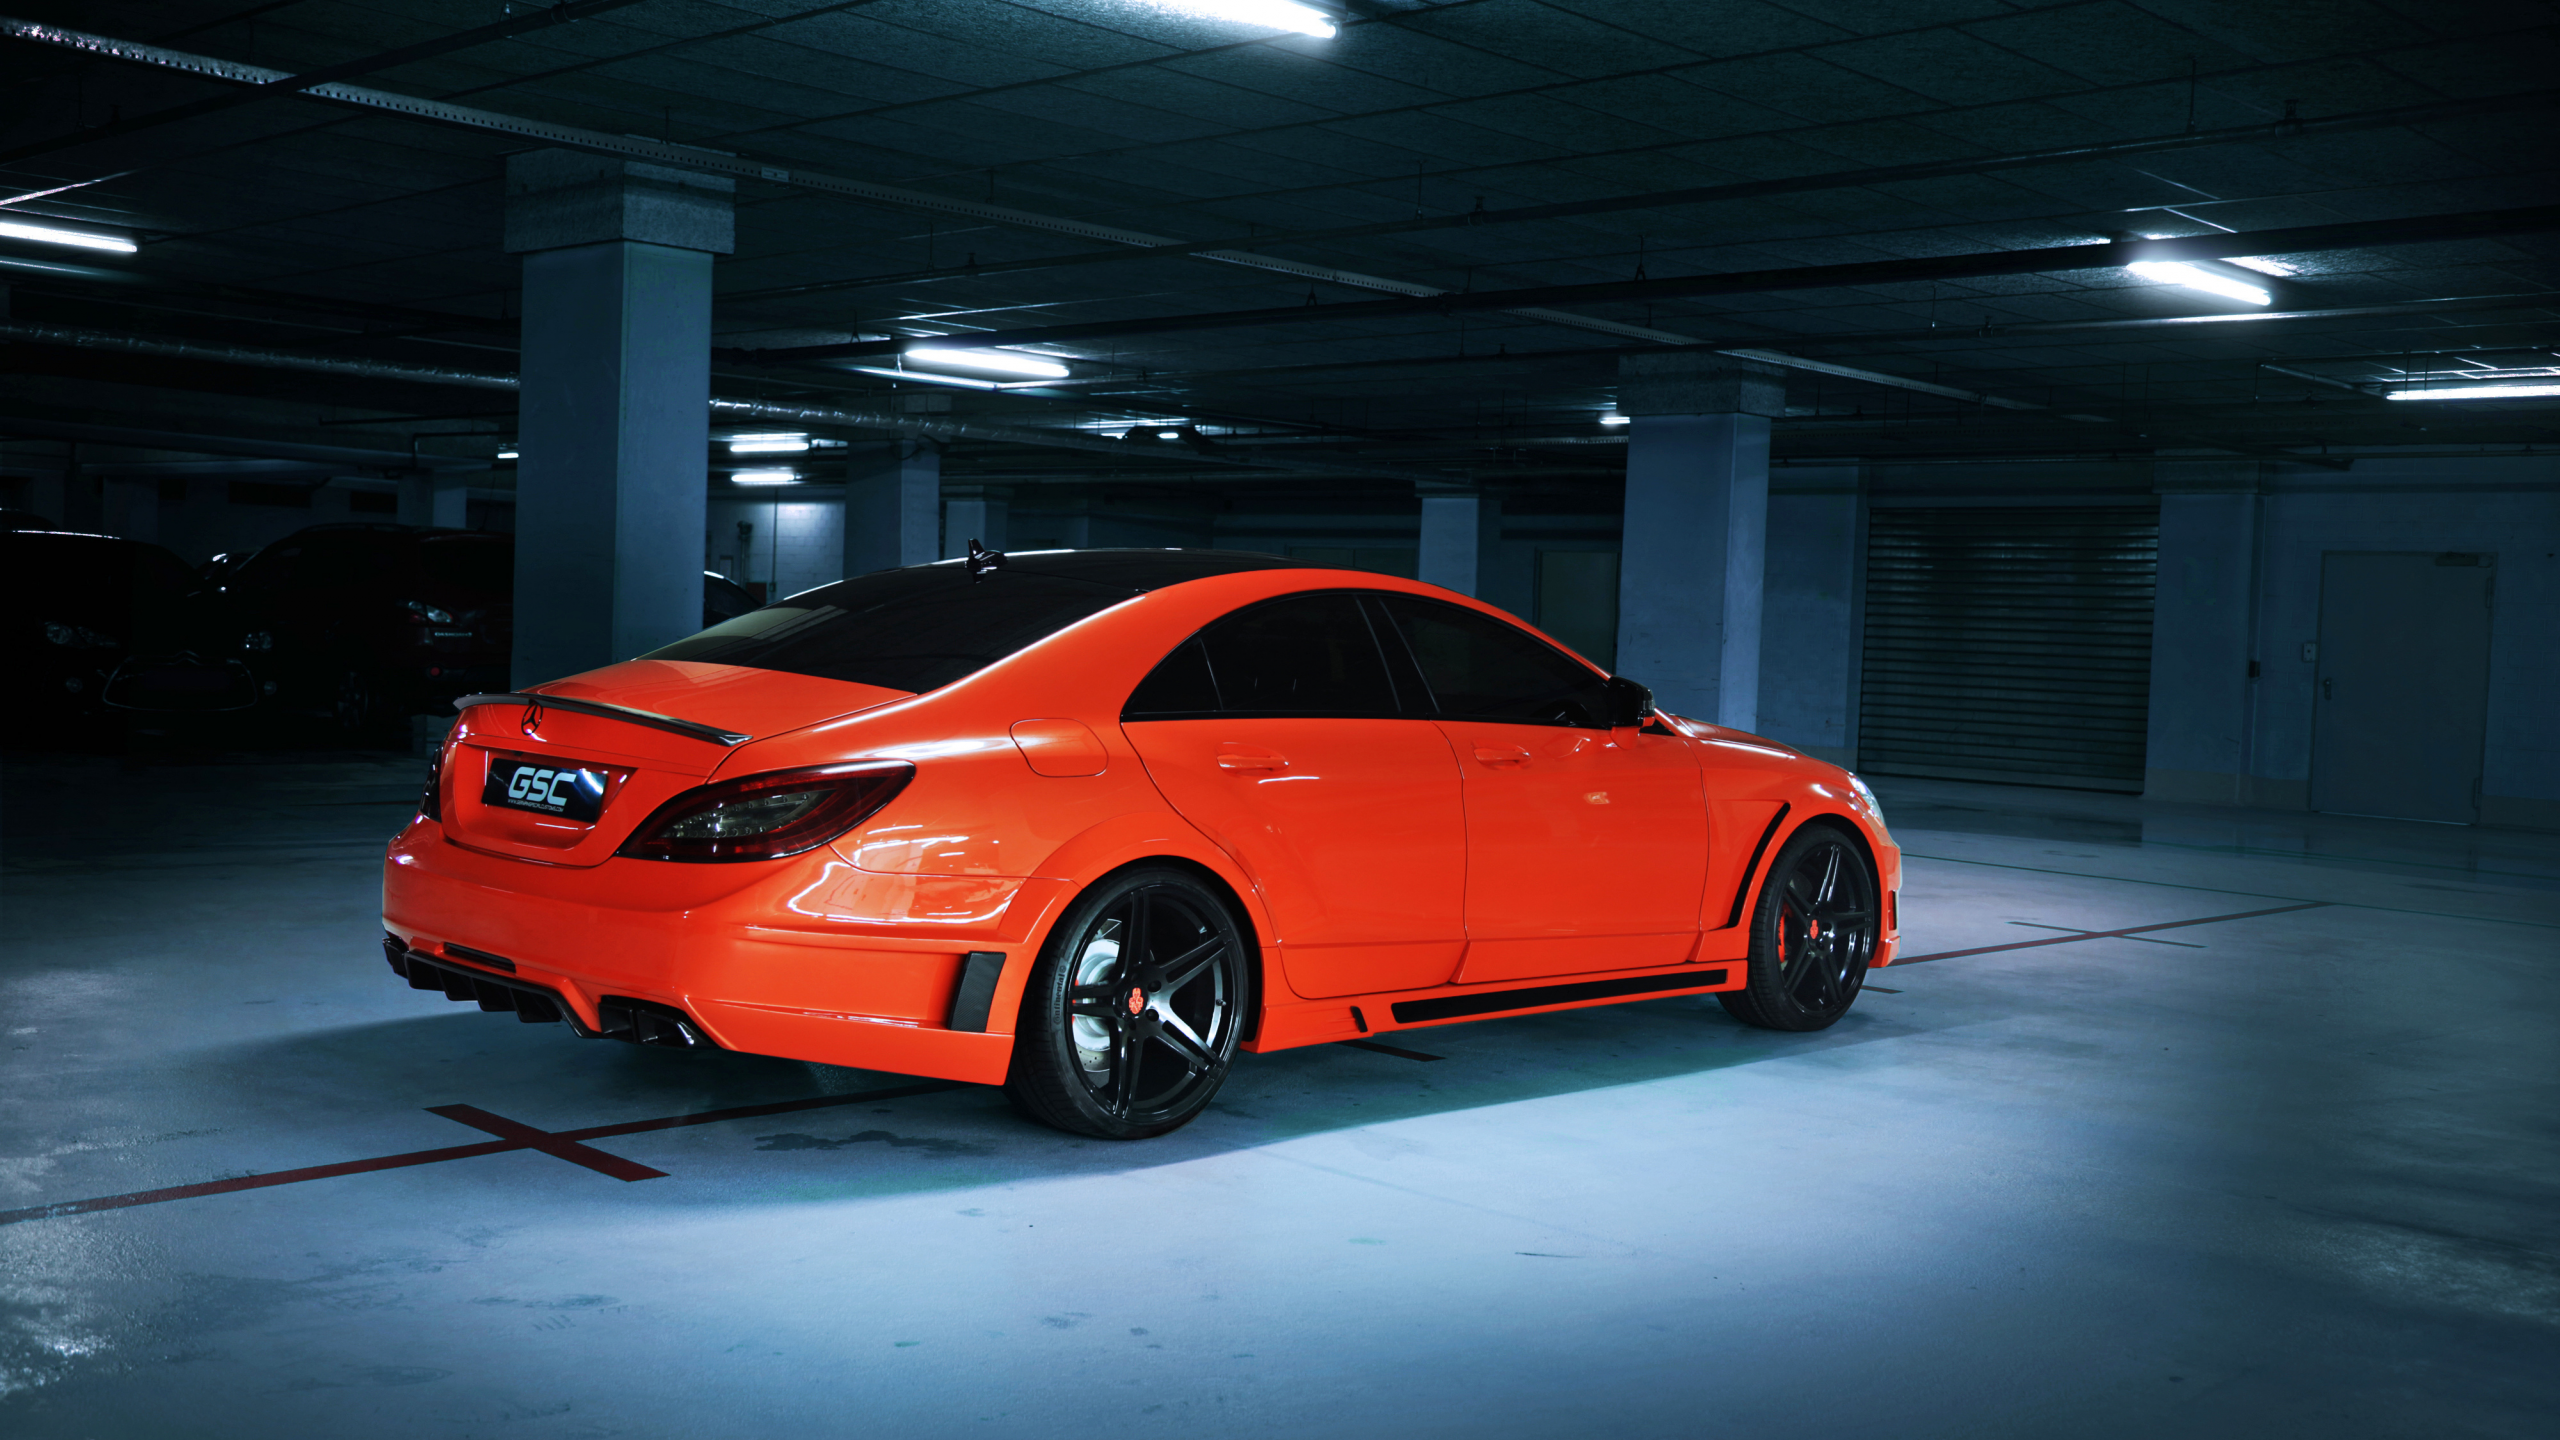 mercedes-benz, cls 63, tuning, gsc, car, amg, тачка, тюнинг, German special customs